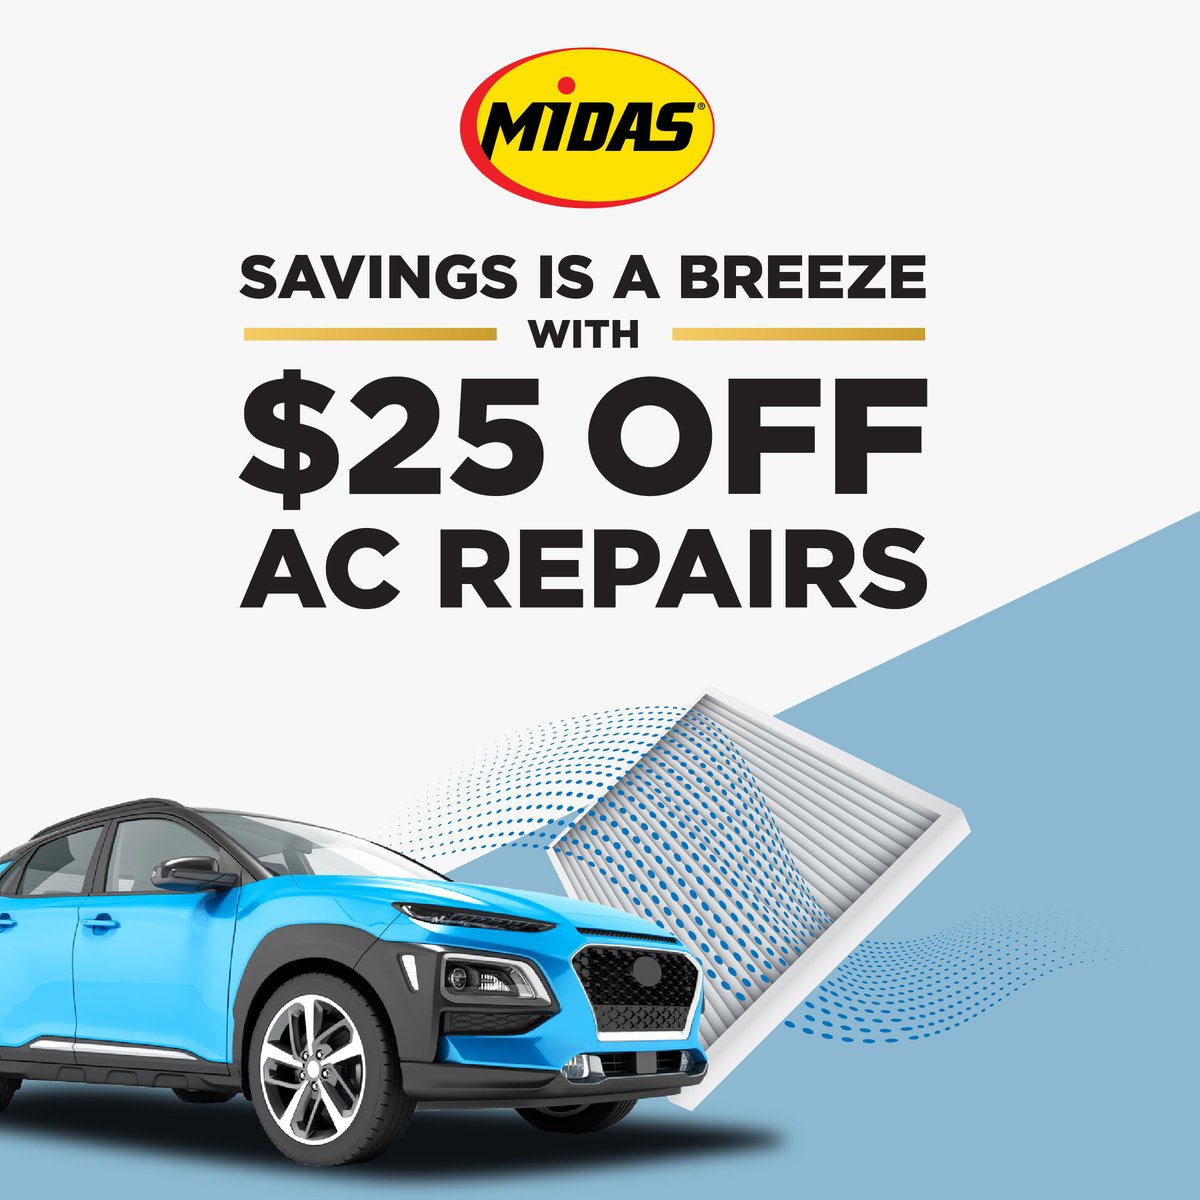 Make sure you stay cool this summer with $25 OFF all A/C repairs at Midas.